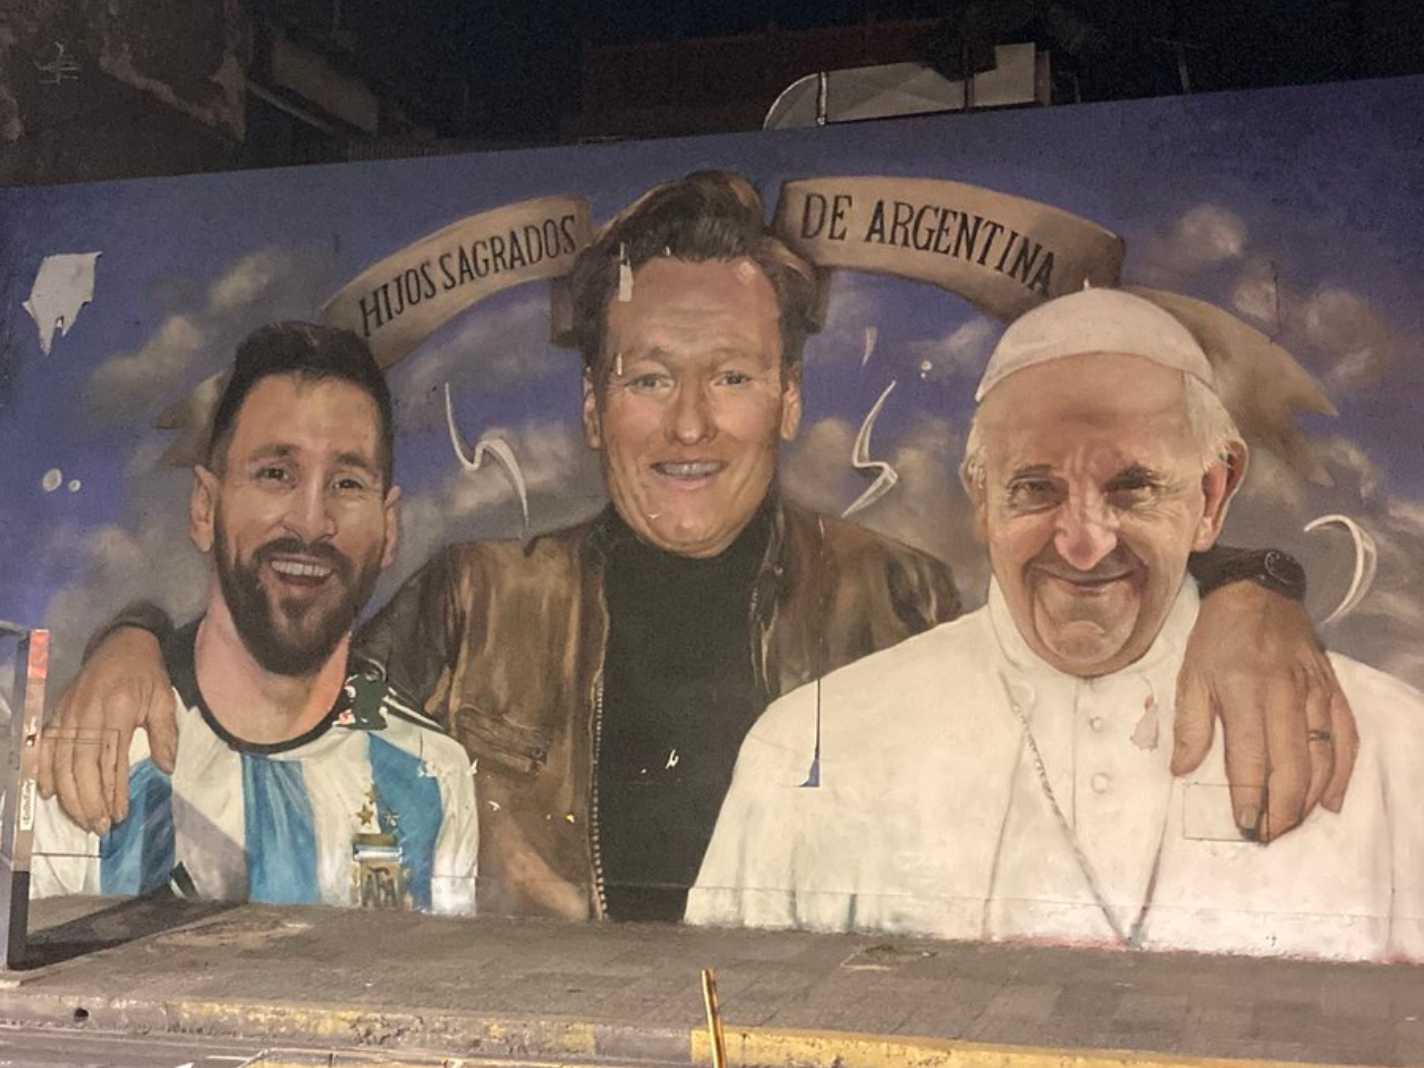 How Did The Lionel Messi, Conan O’Brien and Pope Francis Mural Came About?